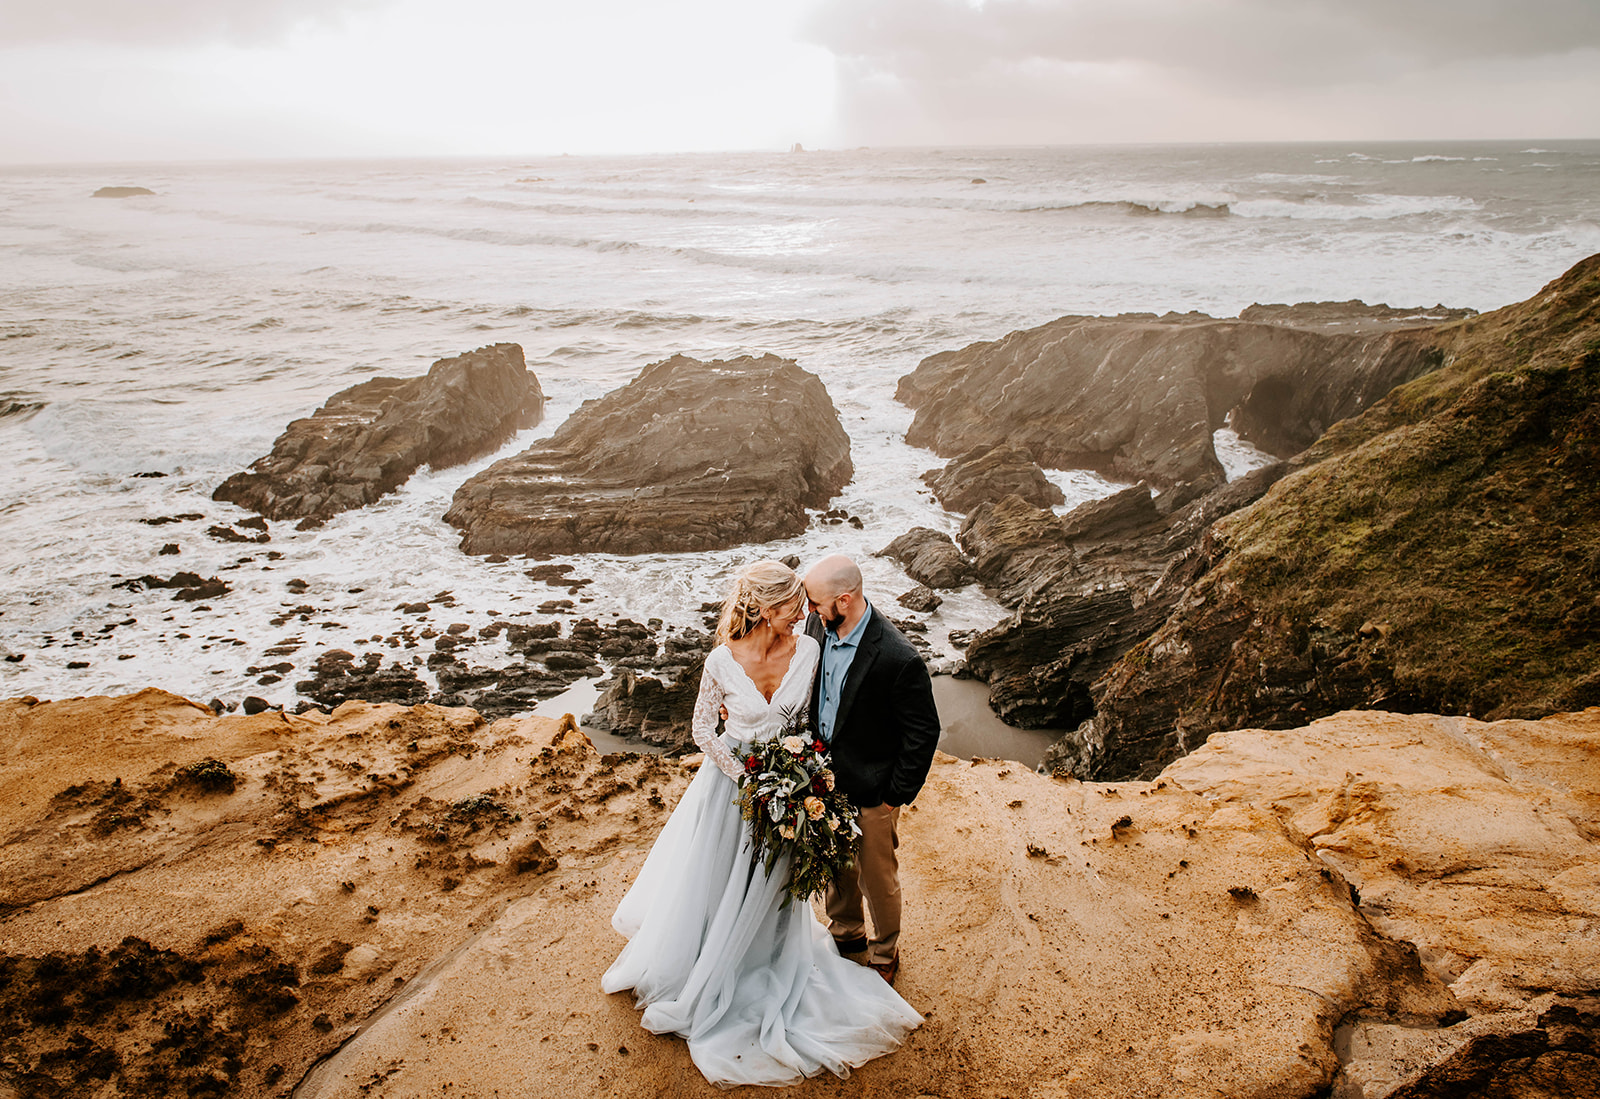 A bride and groom standing forehead to forehead on the cliffs at Otter Point on the Oregon Coast.